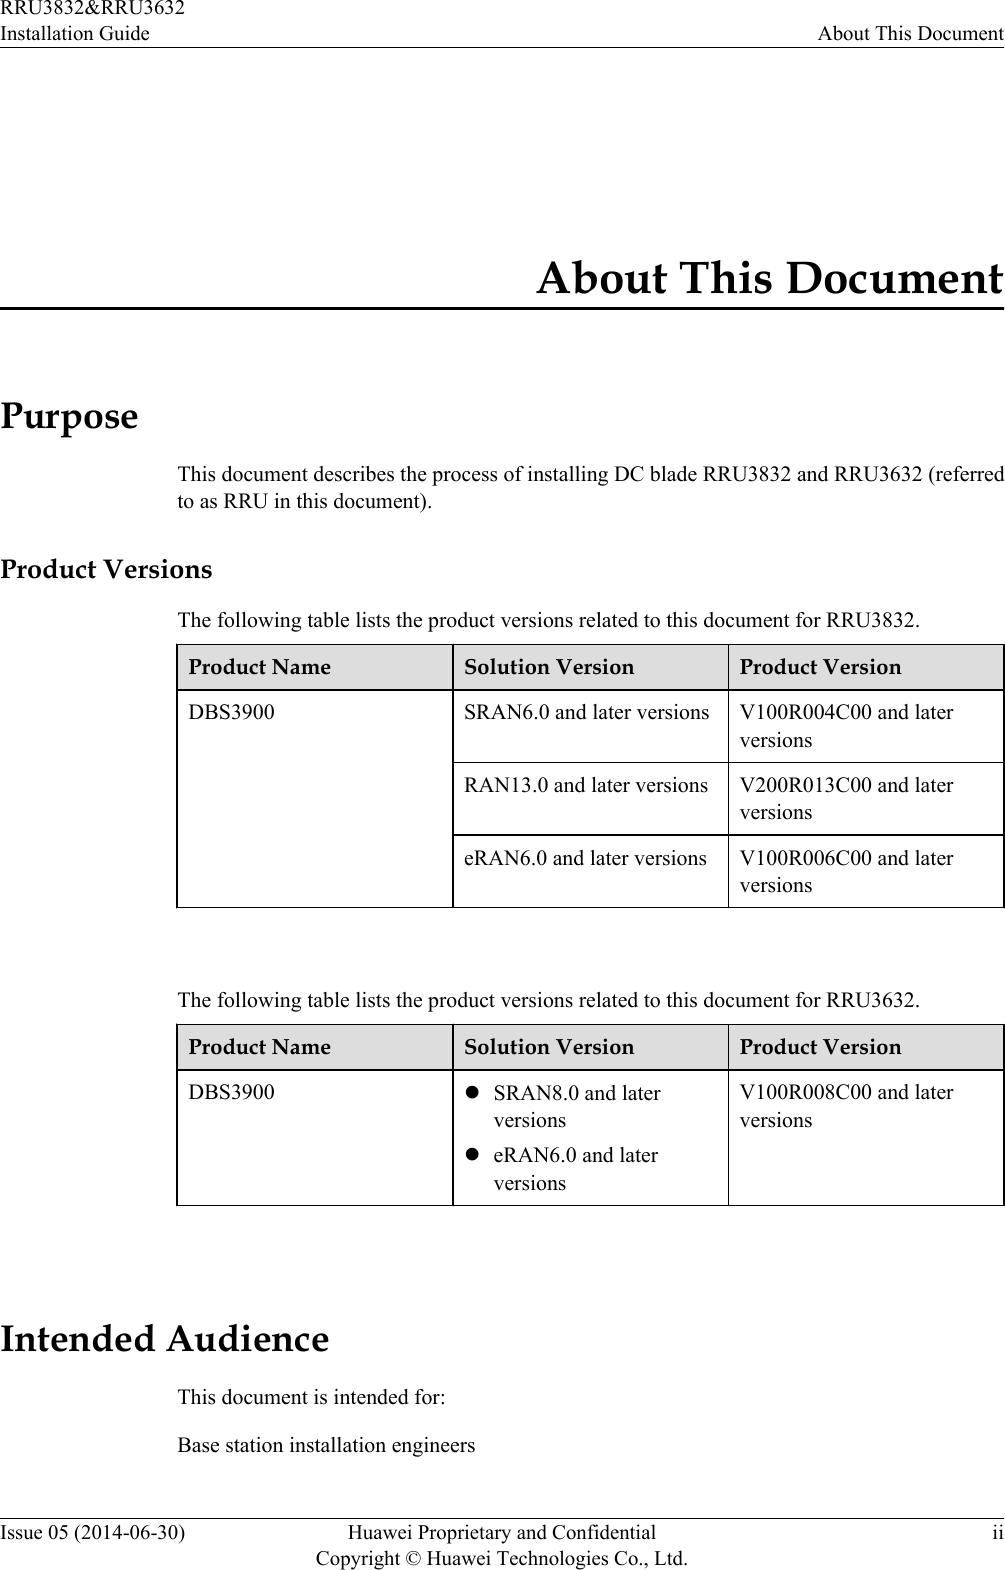 About This DocumentPurposeThis document describes the process of installing DC blade RRU3832 and RRU3632 (referredto as RRU in this document).Product VersionsThe following table lists the product versions related to this document for RRU3832.Product Name Solution Version Product VersionDBS3900 SRAN6.0 and later versions V100R004C00 and laterversionsRAN13.0 and later versions V200R013C00 and laterversionseRAN6.0 and later versions V100R006C00 and laterversions The following table lists the product versions related to this document for RRU3632.Product Name Solution Version Product VersionDBS3900 lSRAN8.0 and laterversionsleRAN6.0 and laterversionsV100R008C00 and laterversions Intended AudienceThis document is intended for:Base station installation engineersRRU3832&amp;RRU3632Installation Guide About This DocumentIssue 05 (2014-06-30) Huawei Proprietary and ConfidentialCopyright © Huawei Technologies Co., Ltd.ii